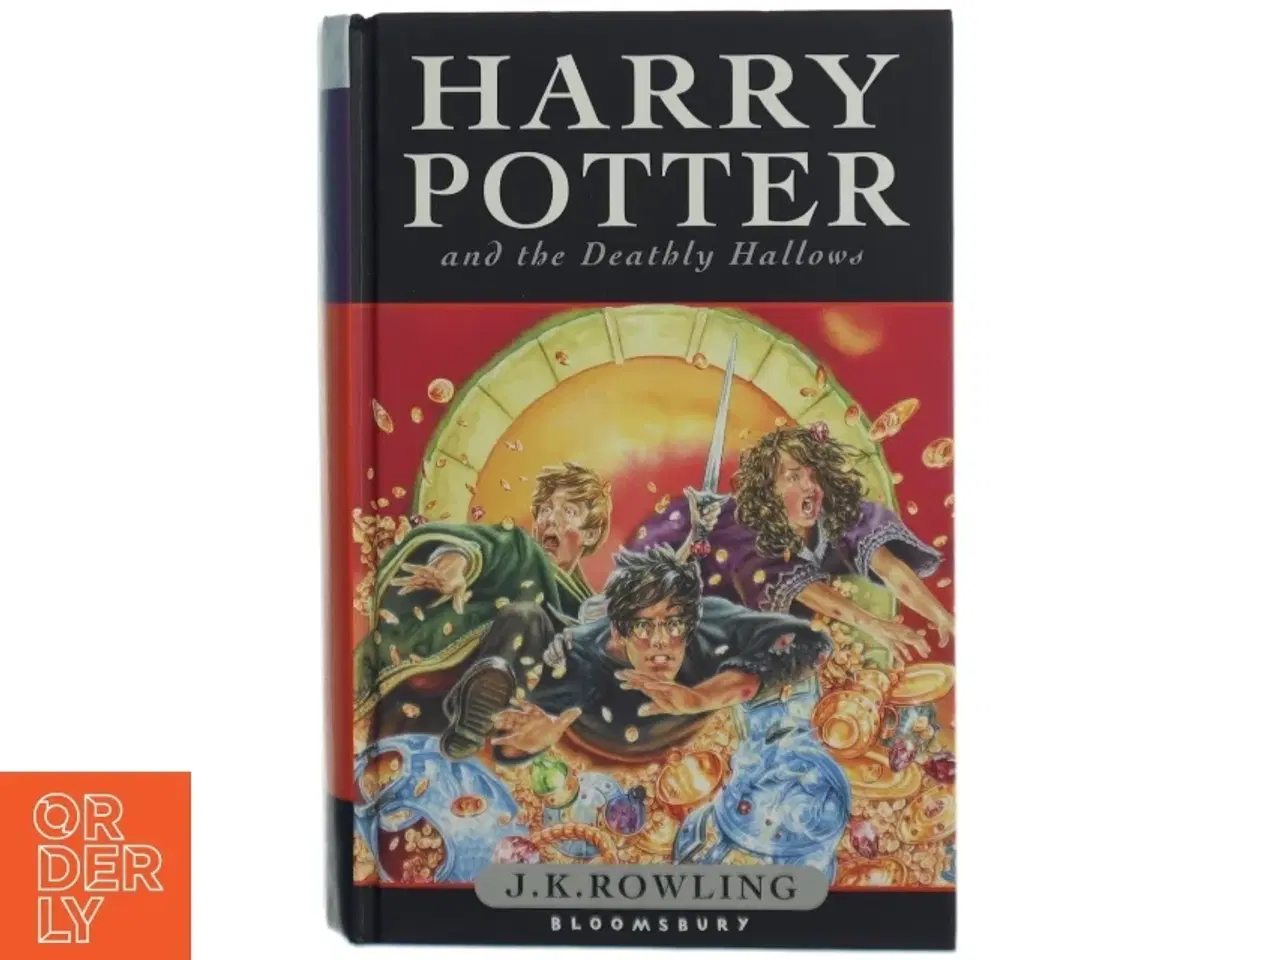 Billede 1 - Harry Potter and the deathly hallows by J. K. Rowling (Bog)